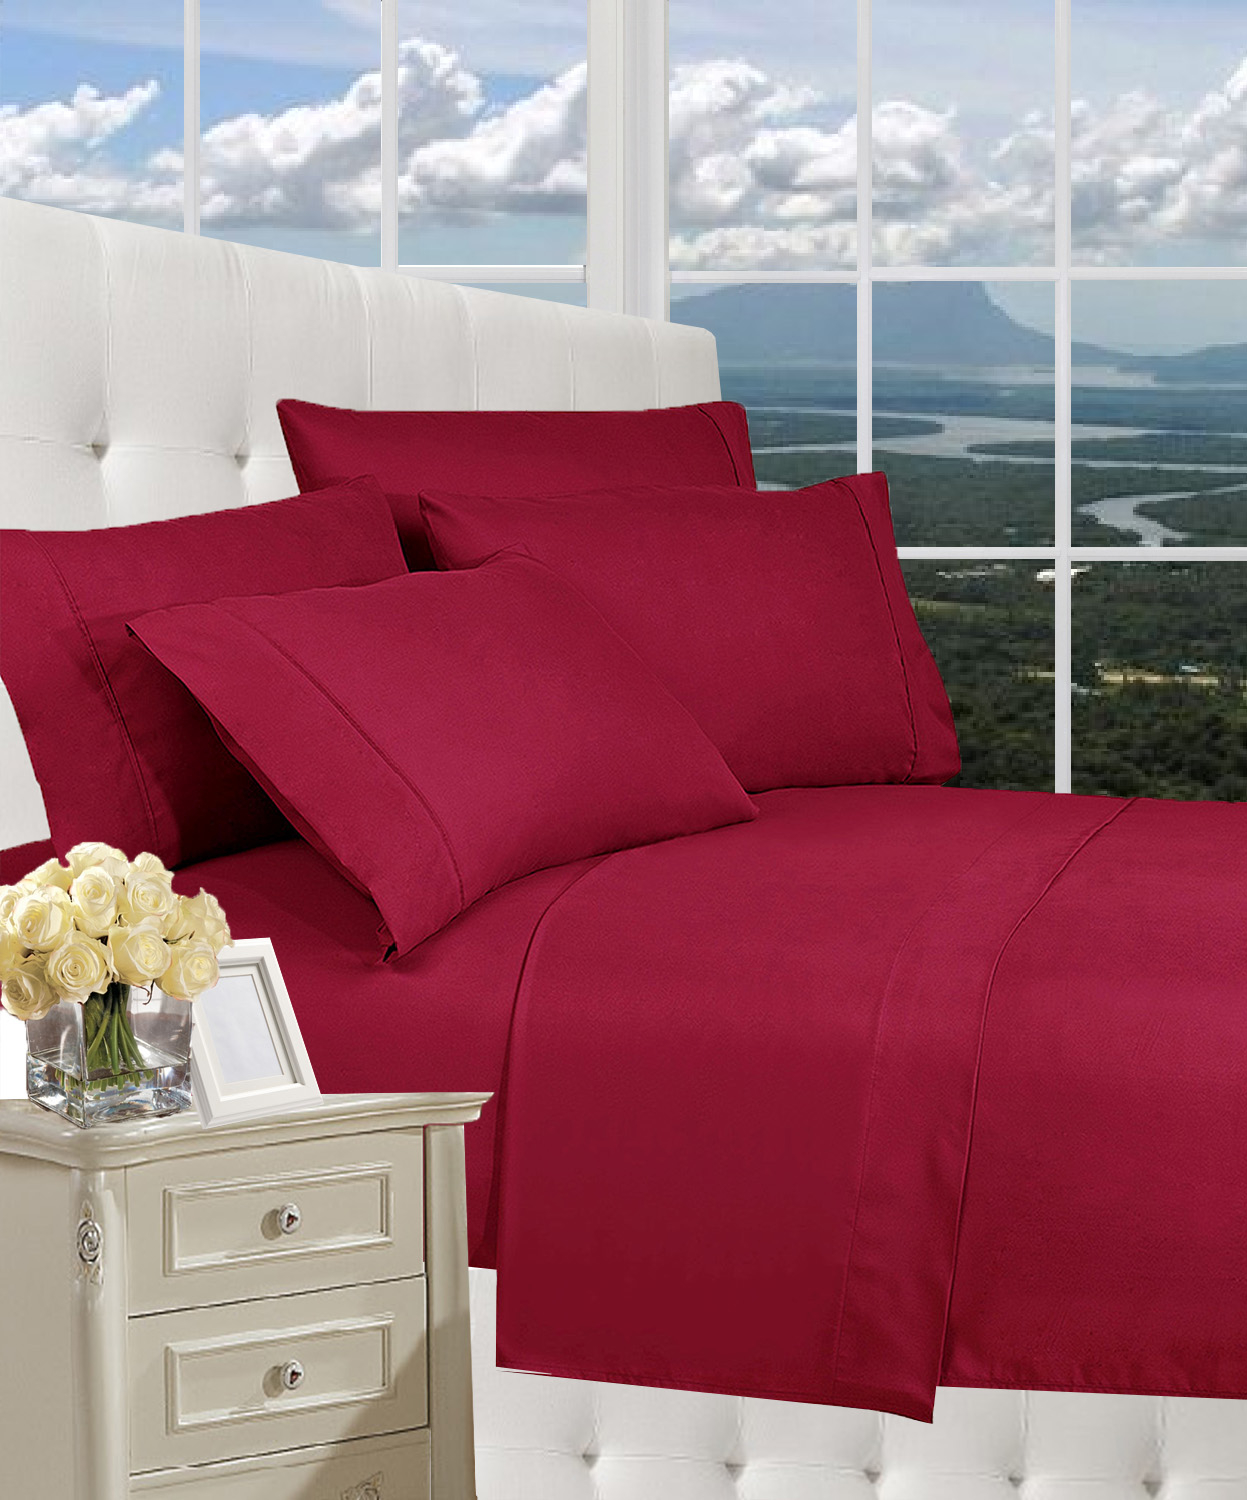 Elegant Comfort 1800 Series Wrinkle Resistant Egyptian Quality Hypoallergenic Ultra Soft Luxury 3-piece Bed Sheet Set, Twin, Burgundy